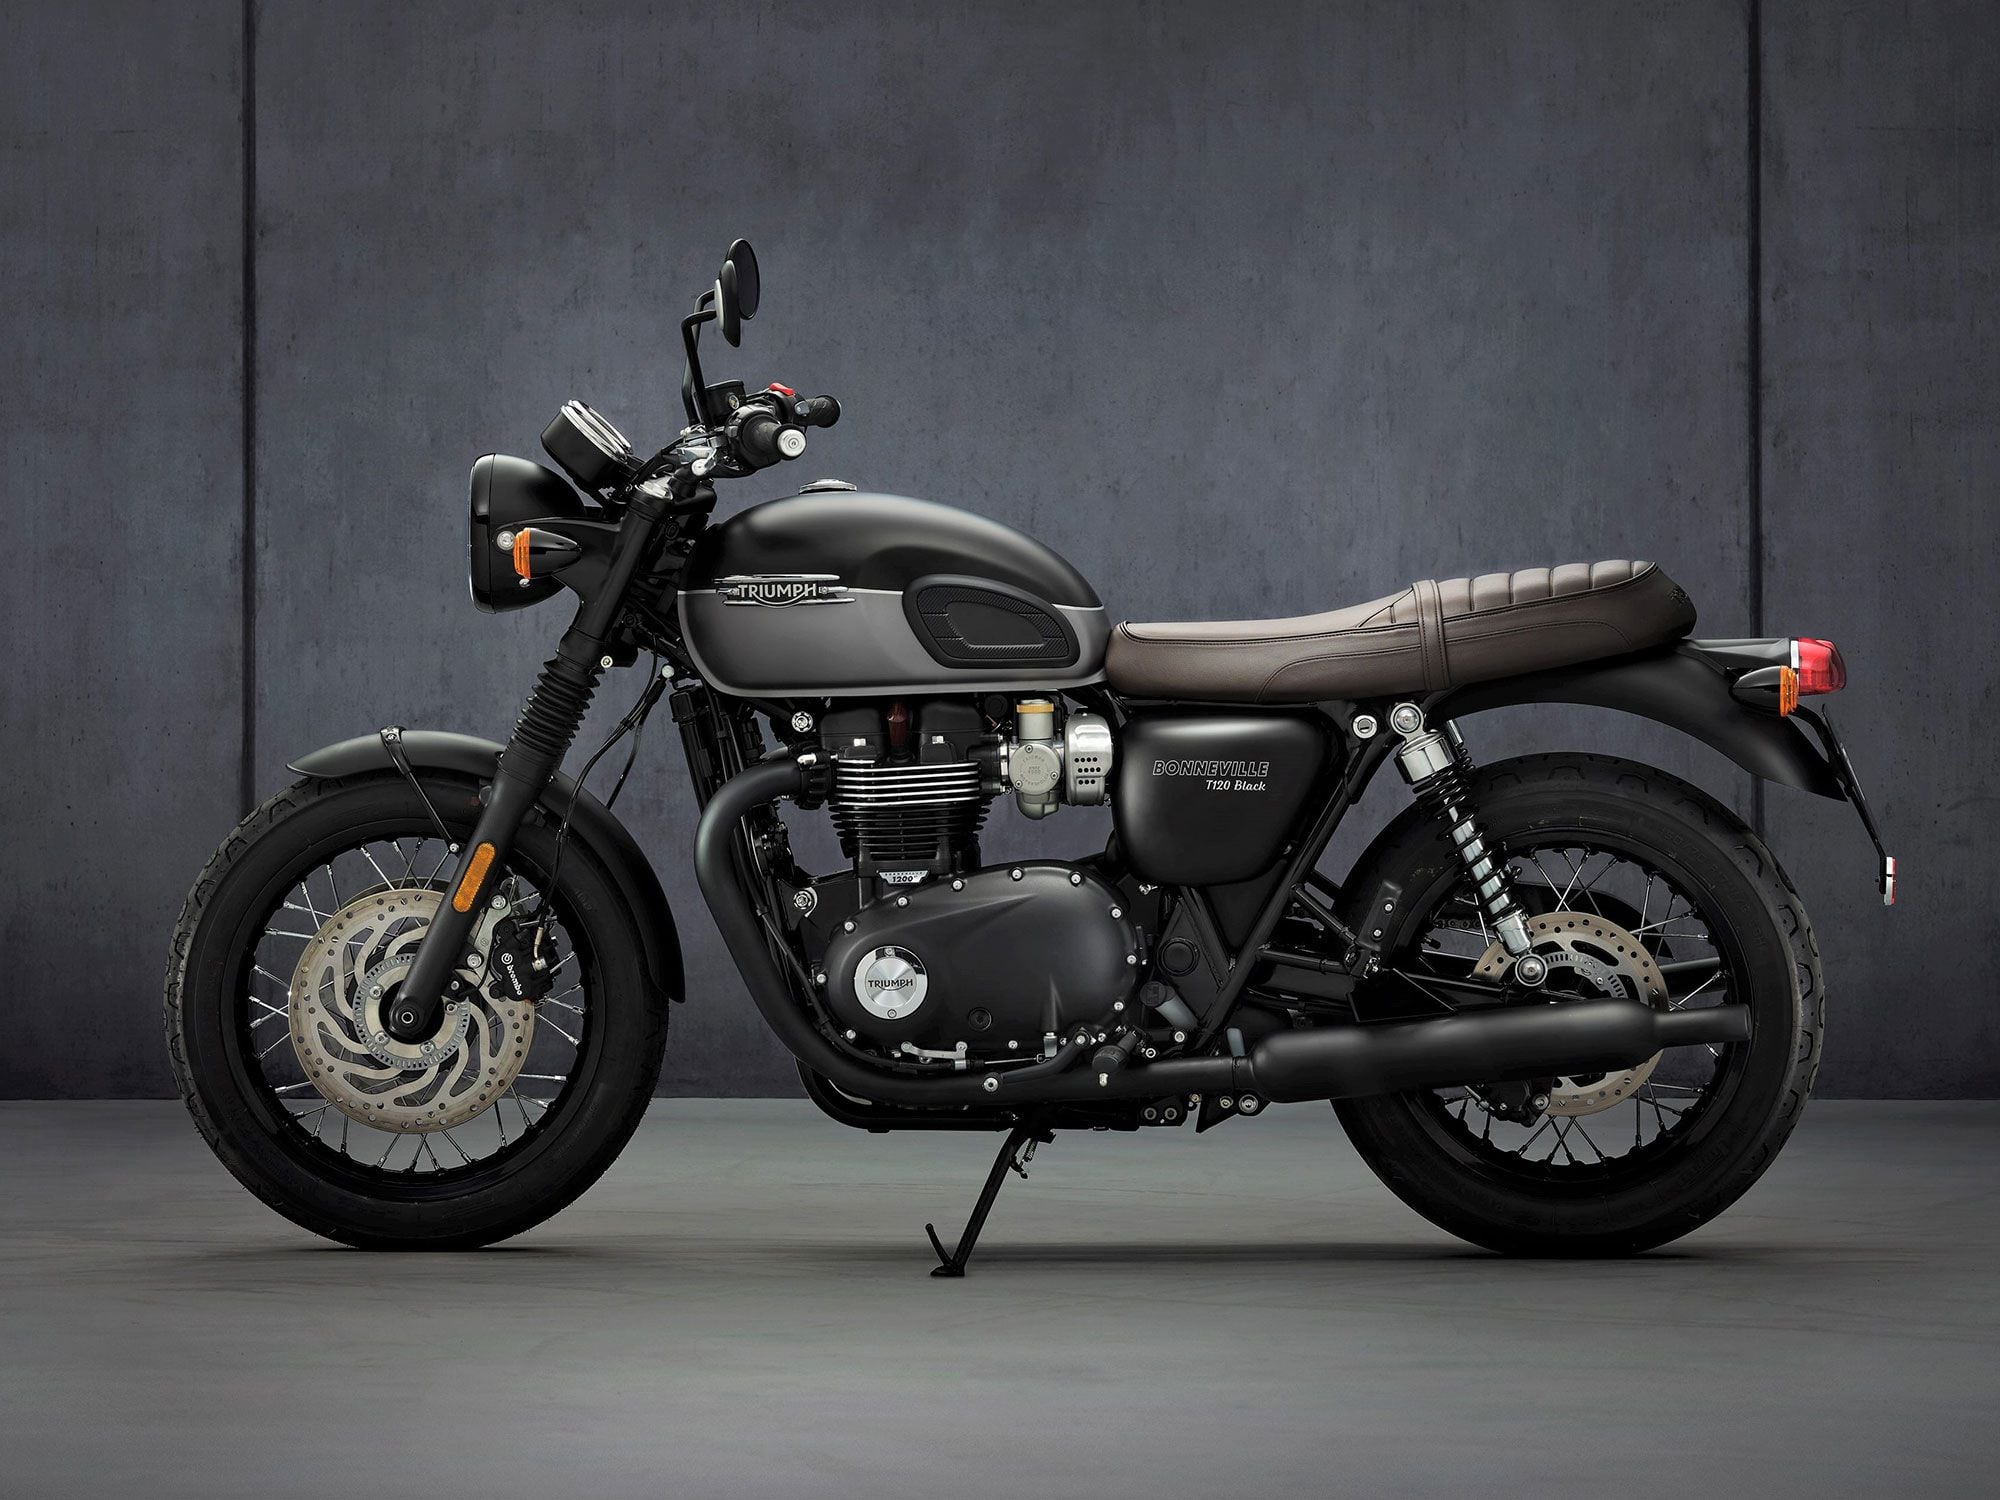 The 2021 T120 Black gets the same subtle changes: less weight, less inertia, snappier engine. Cruise control is now standard.